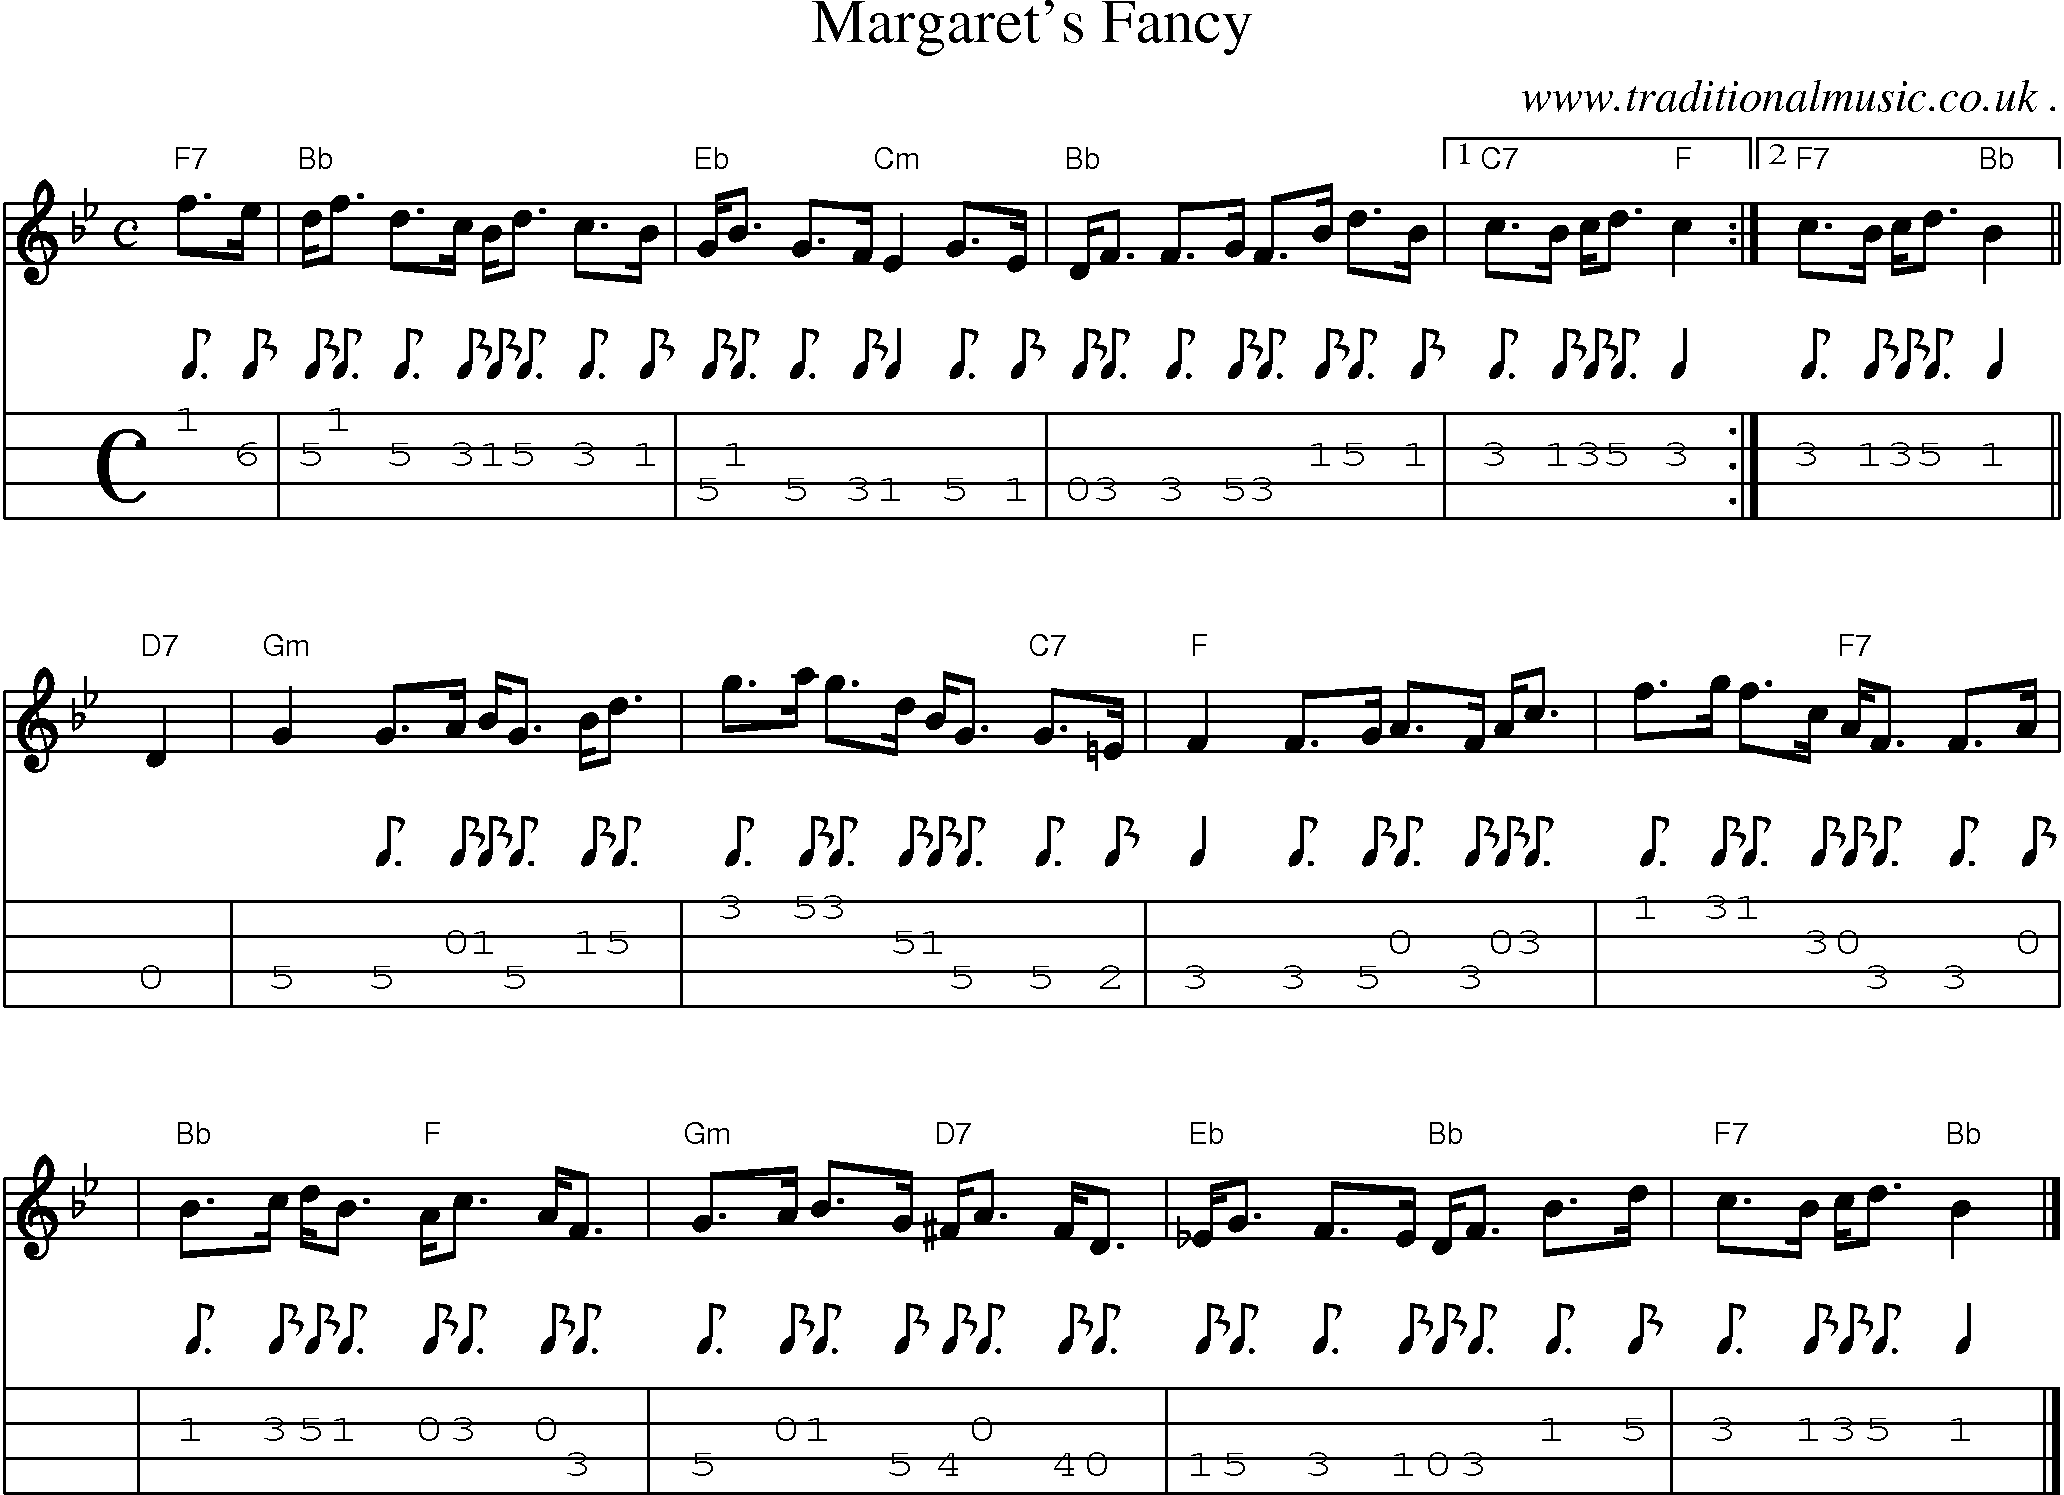 Sheet-music  score, Chords and Mandolin Tabs for Margarets Fancy